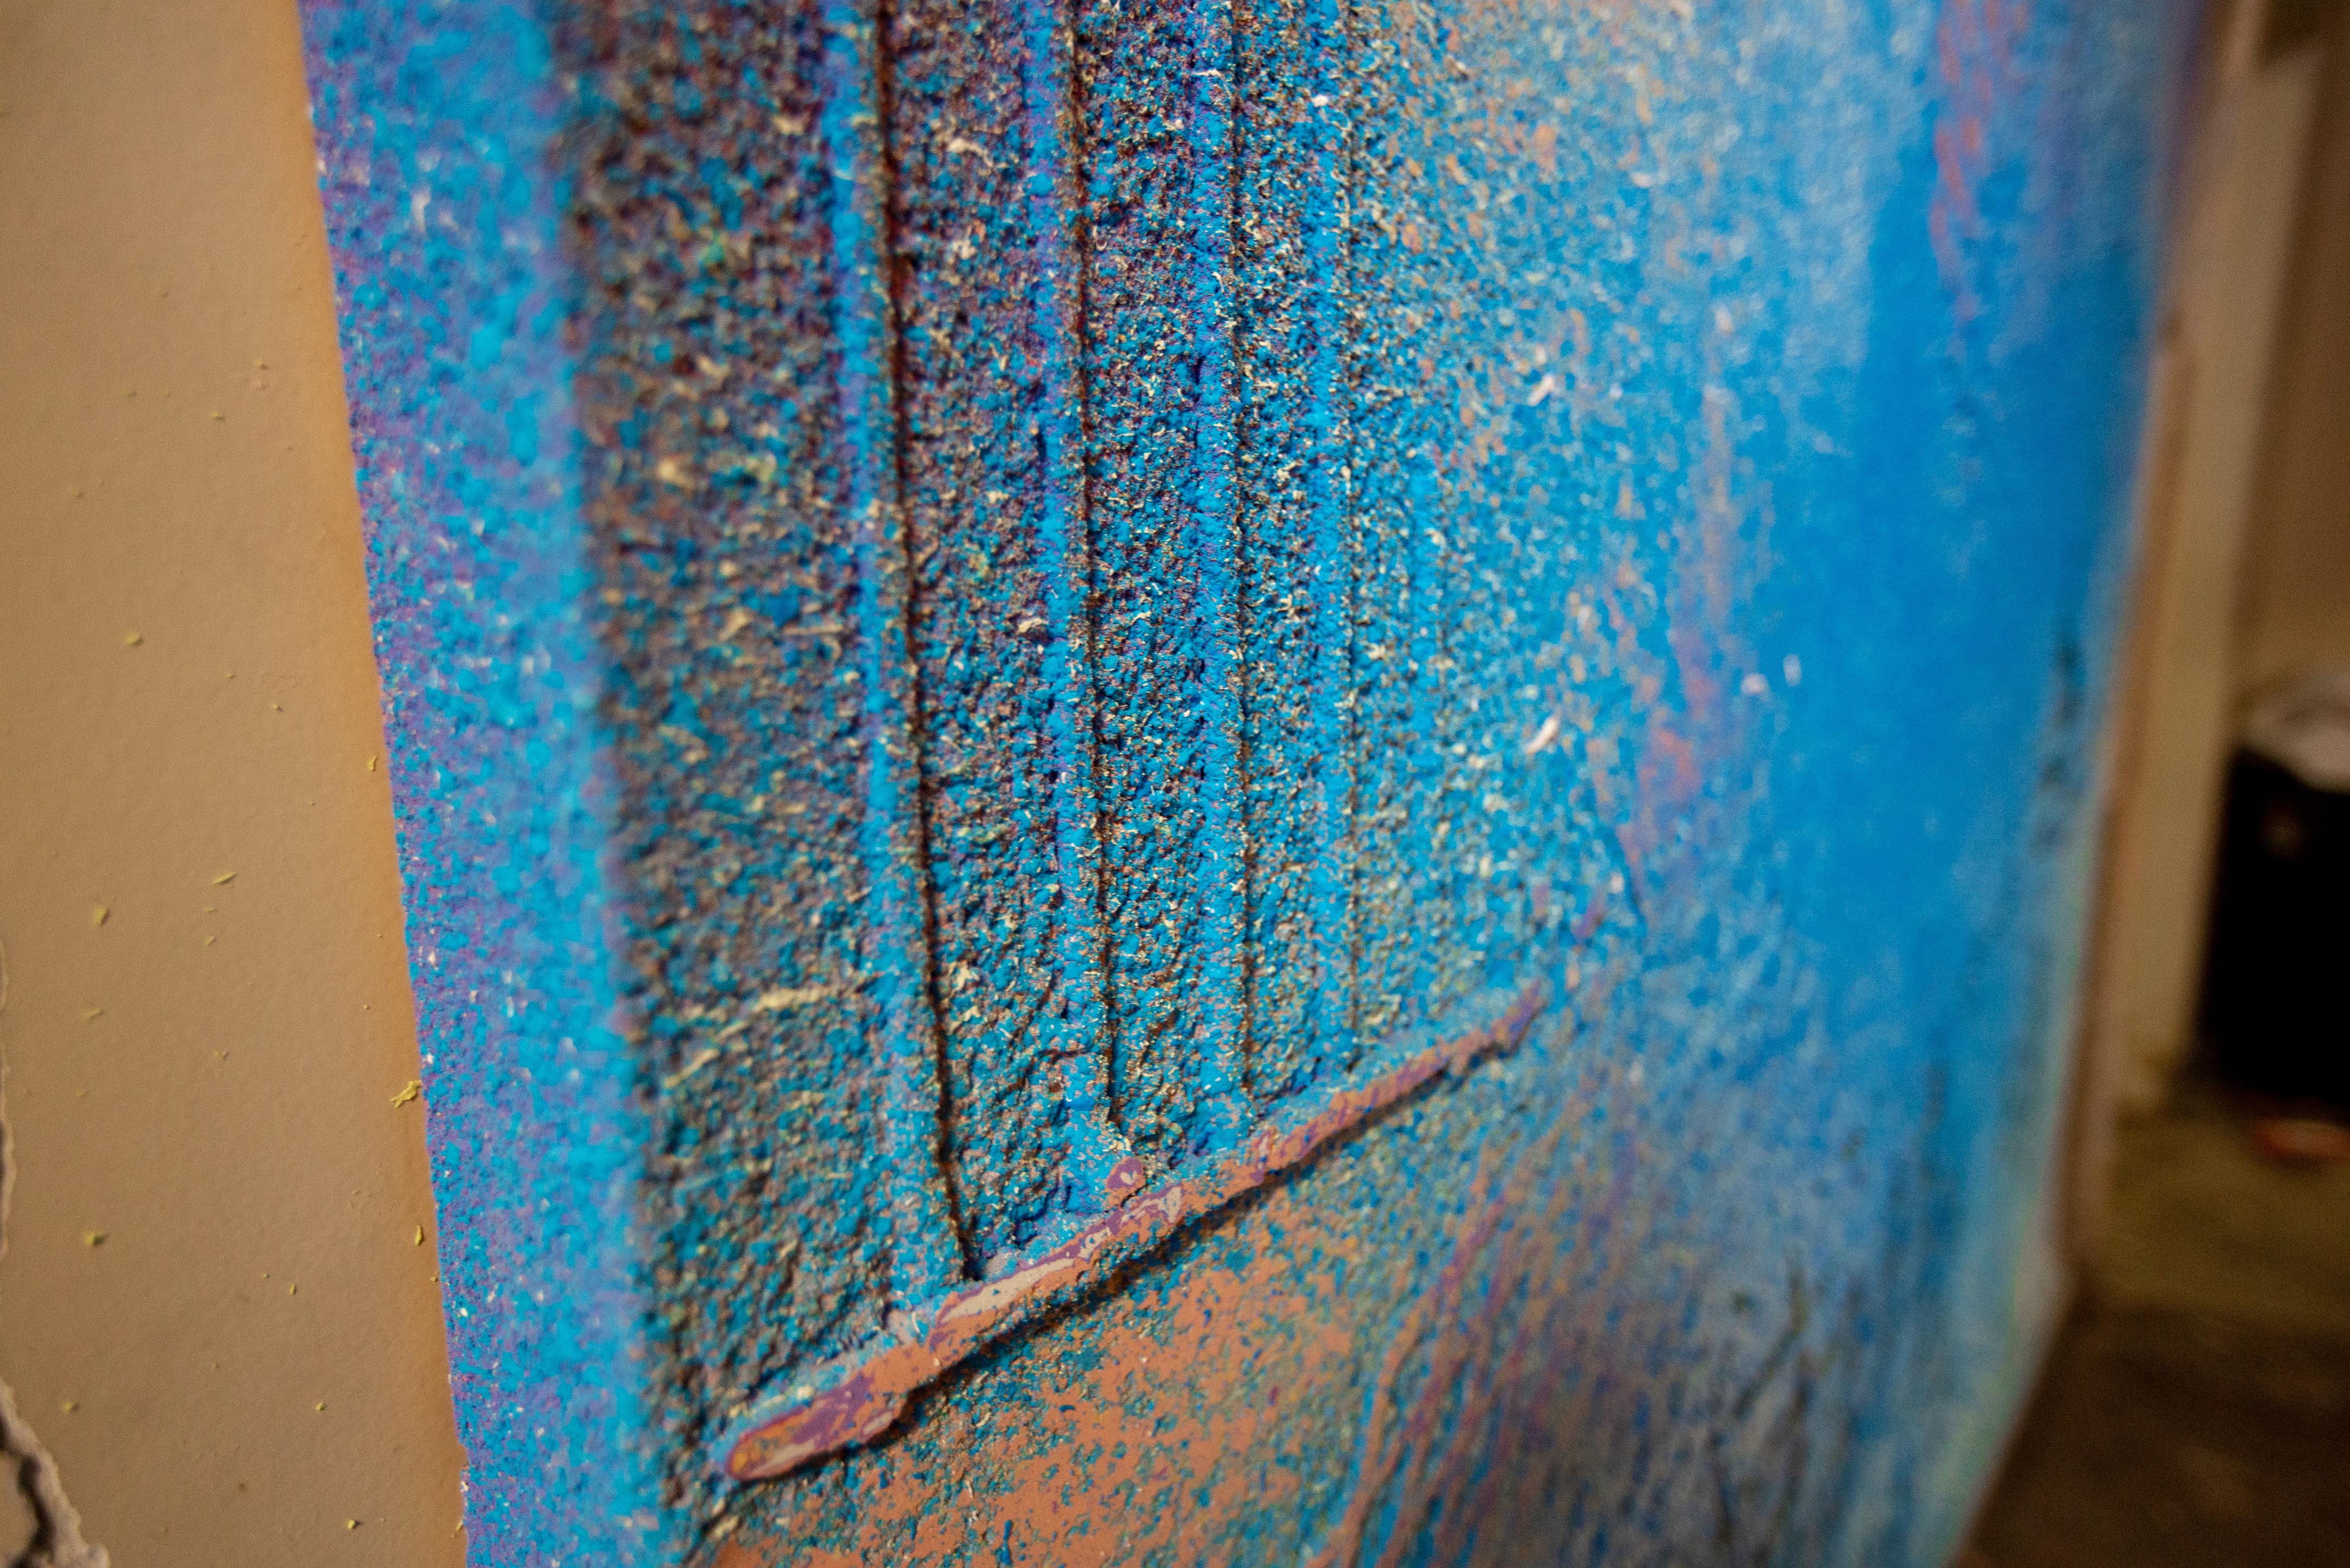 This unique piece is a splash of mixed colors, figures and shapes to create a plethora of textures. The piece is predominantly in shades of blue, though it has a mixture of yellows, splashes of purple and orange in different parts of the piece. This